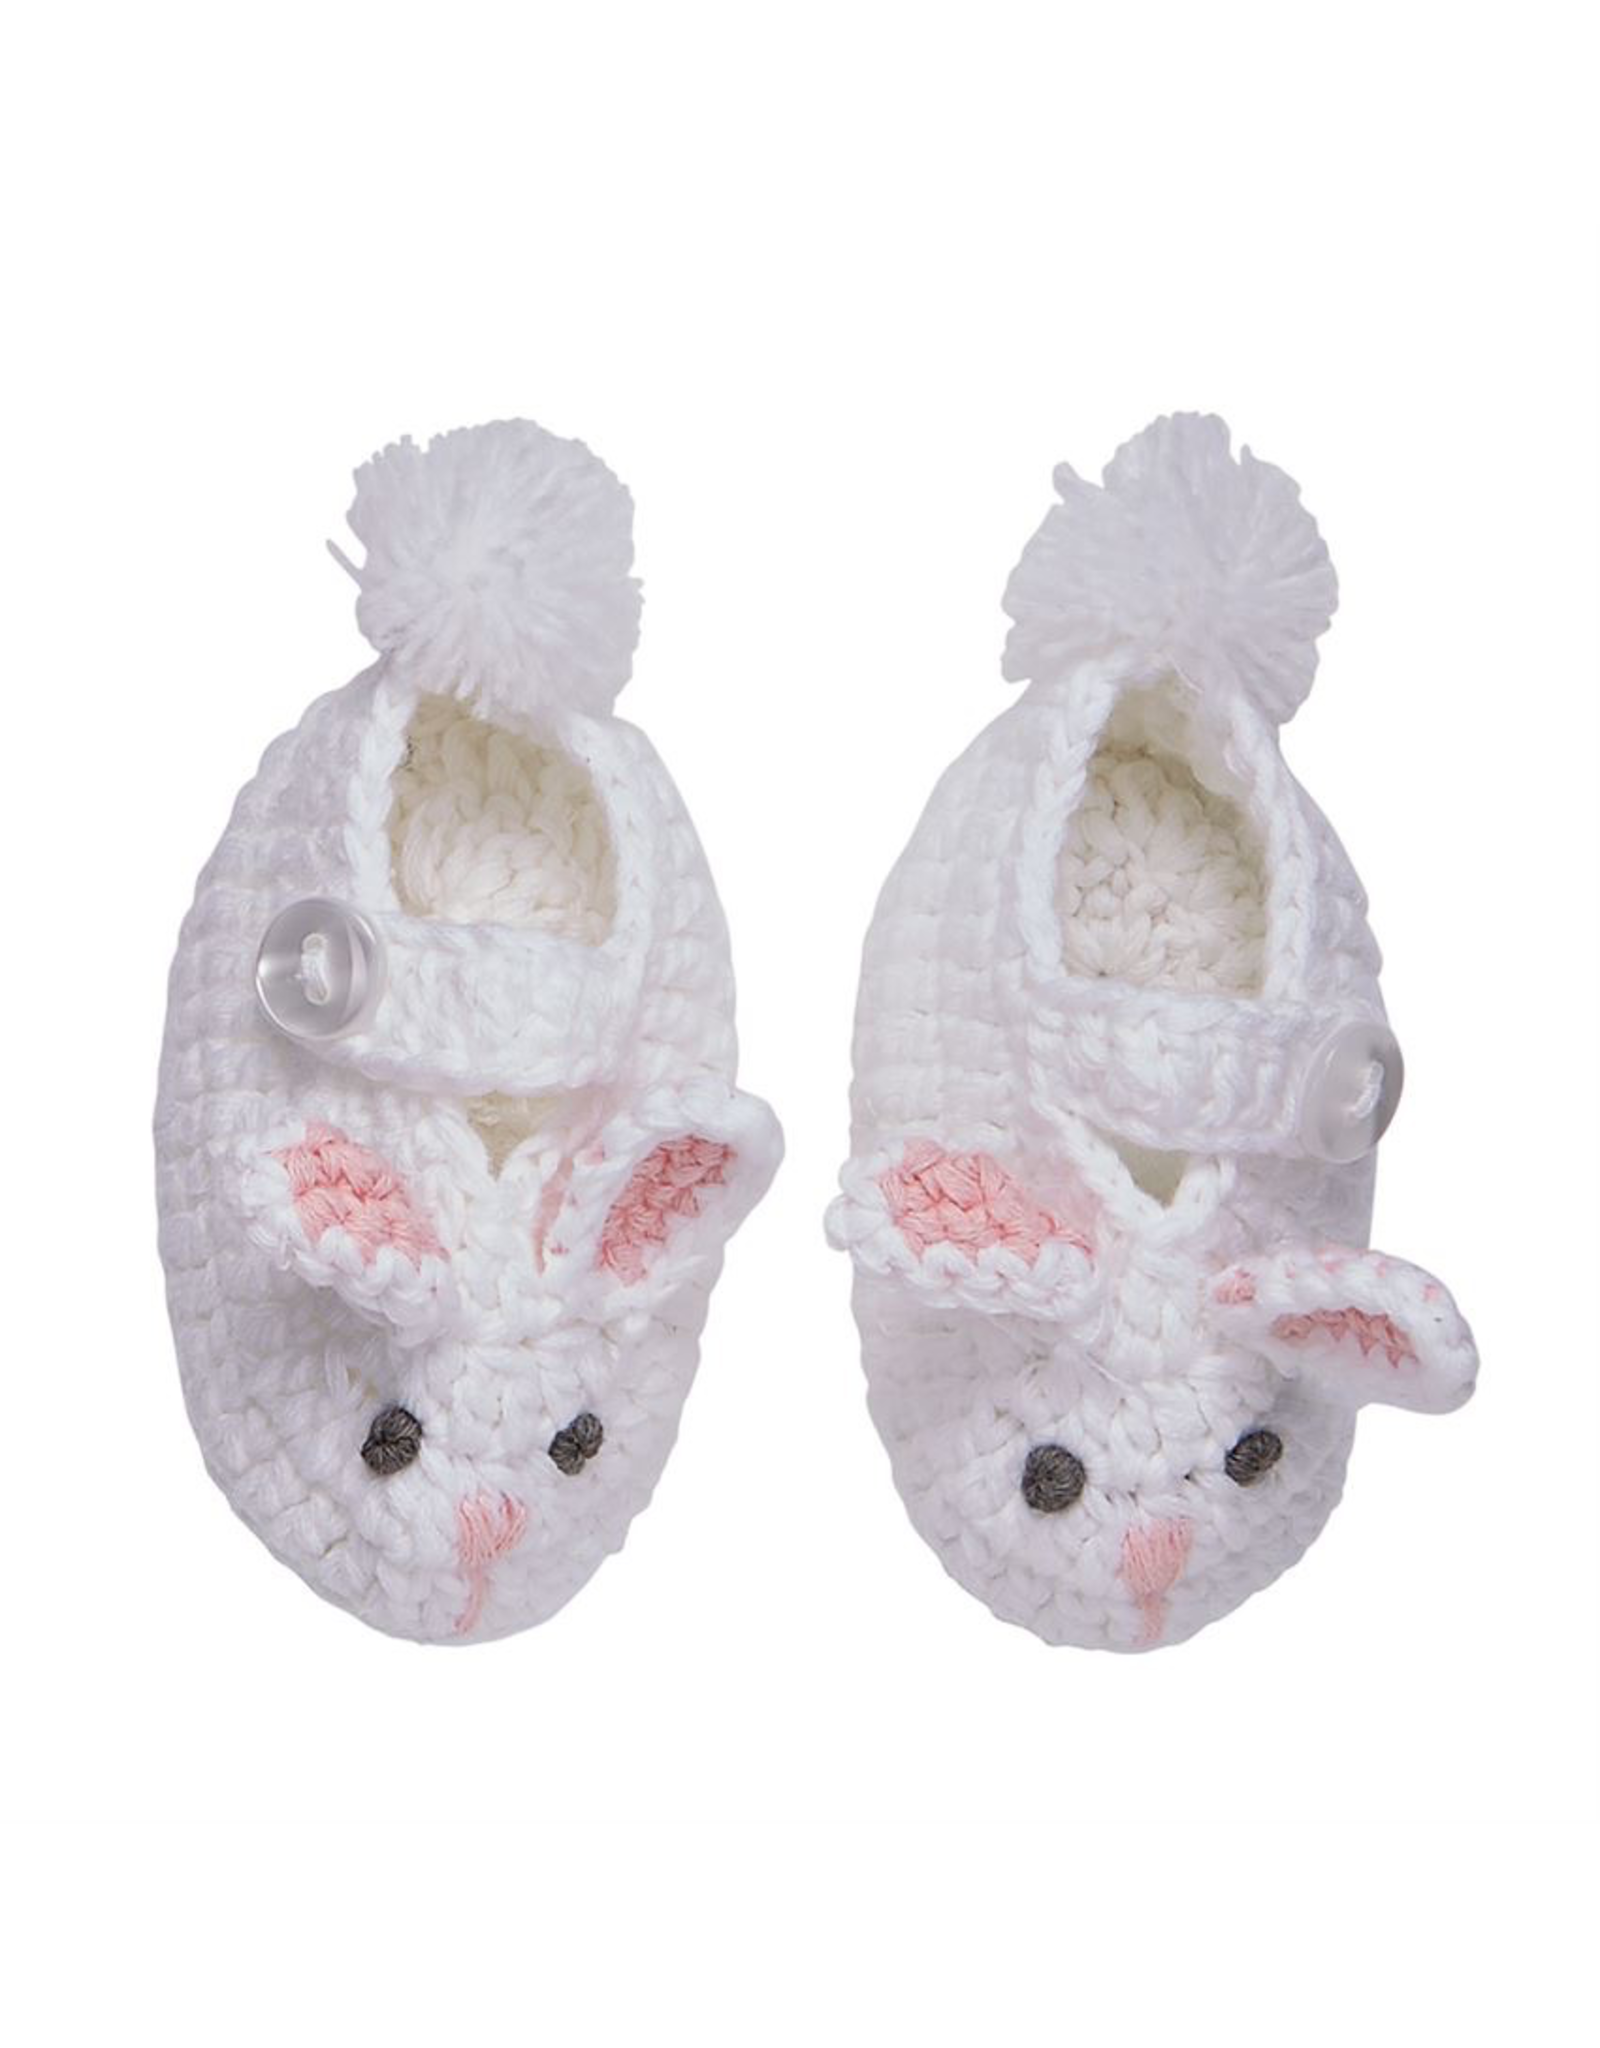 Mud Pie White And Pink Bunny Crochet Knit Booties 0-3 Months